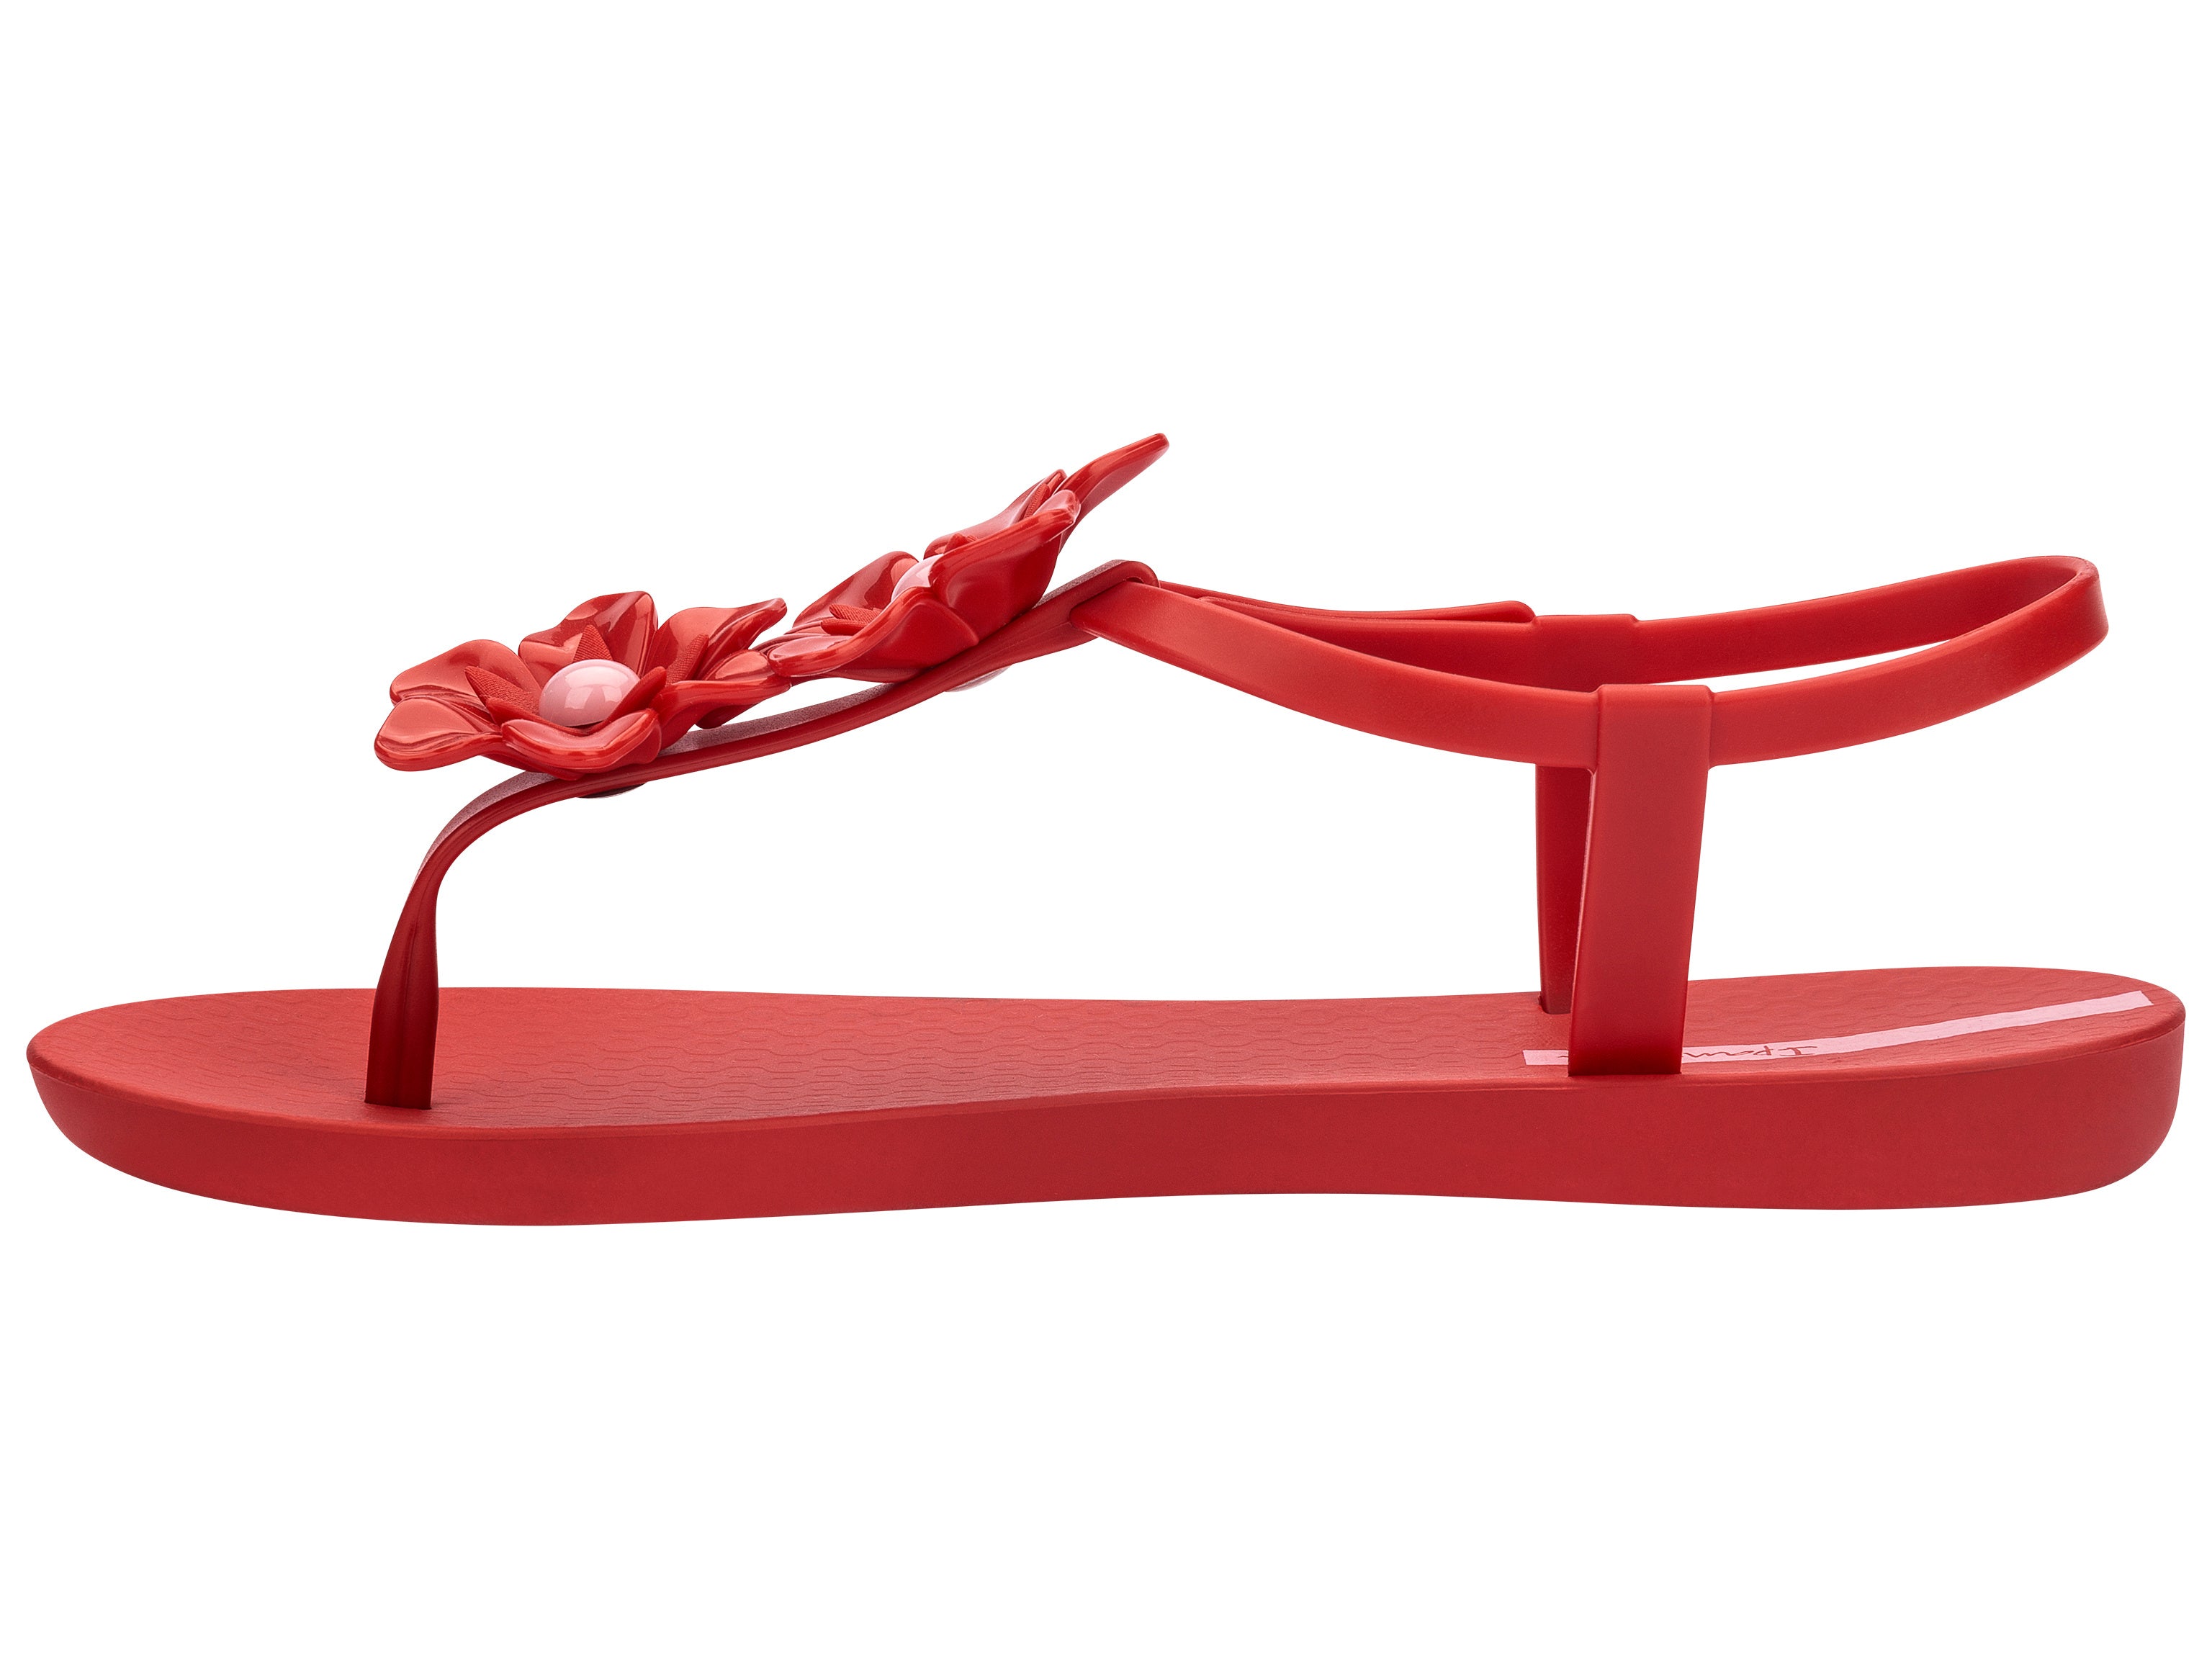 Inner side view of a Red Ipanema Duo Flowers women's t-strap sandal with two flowers.